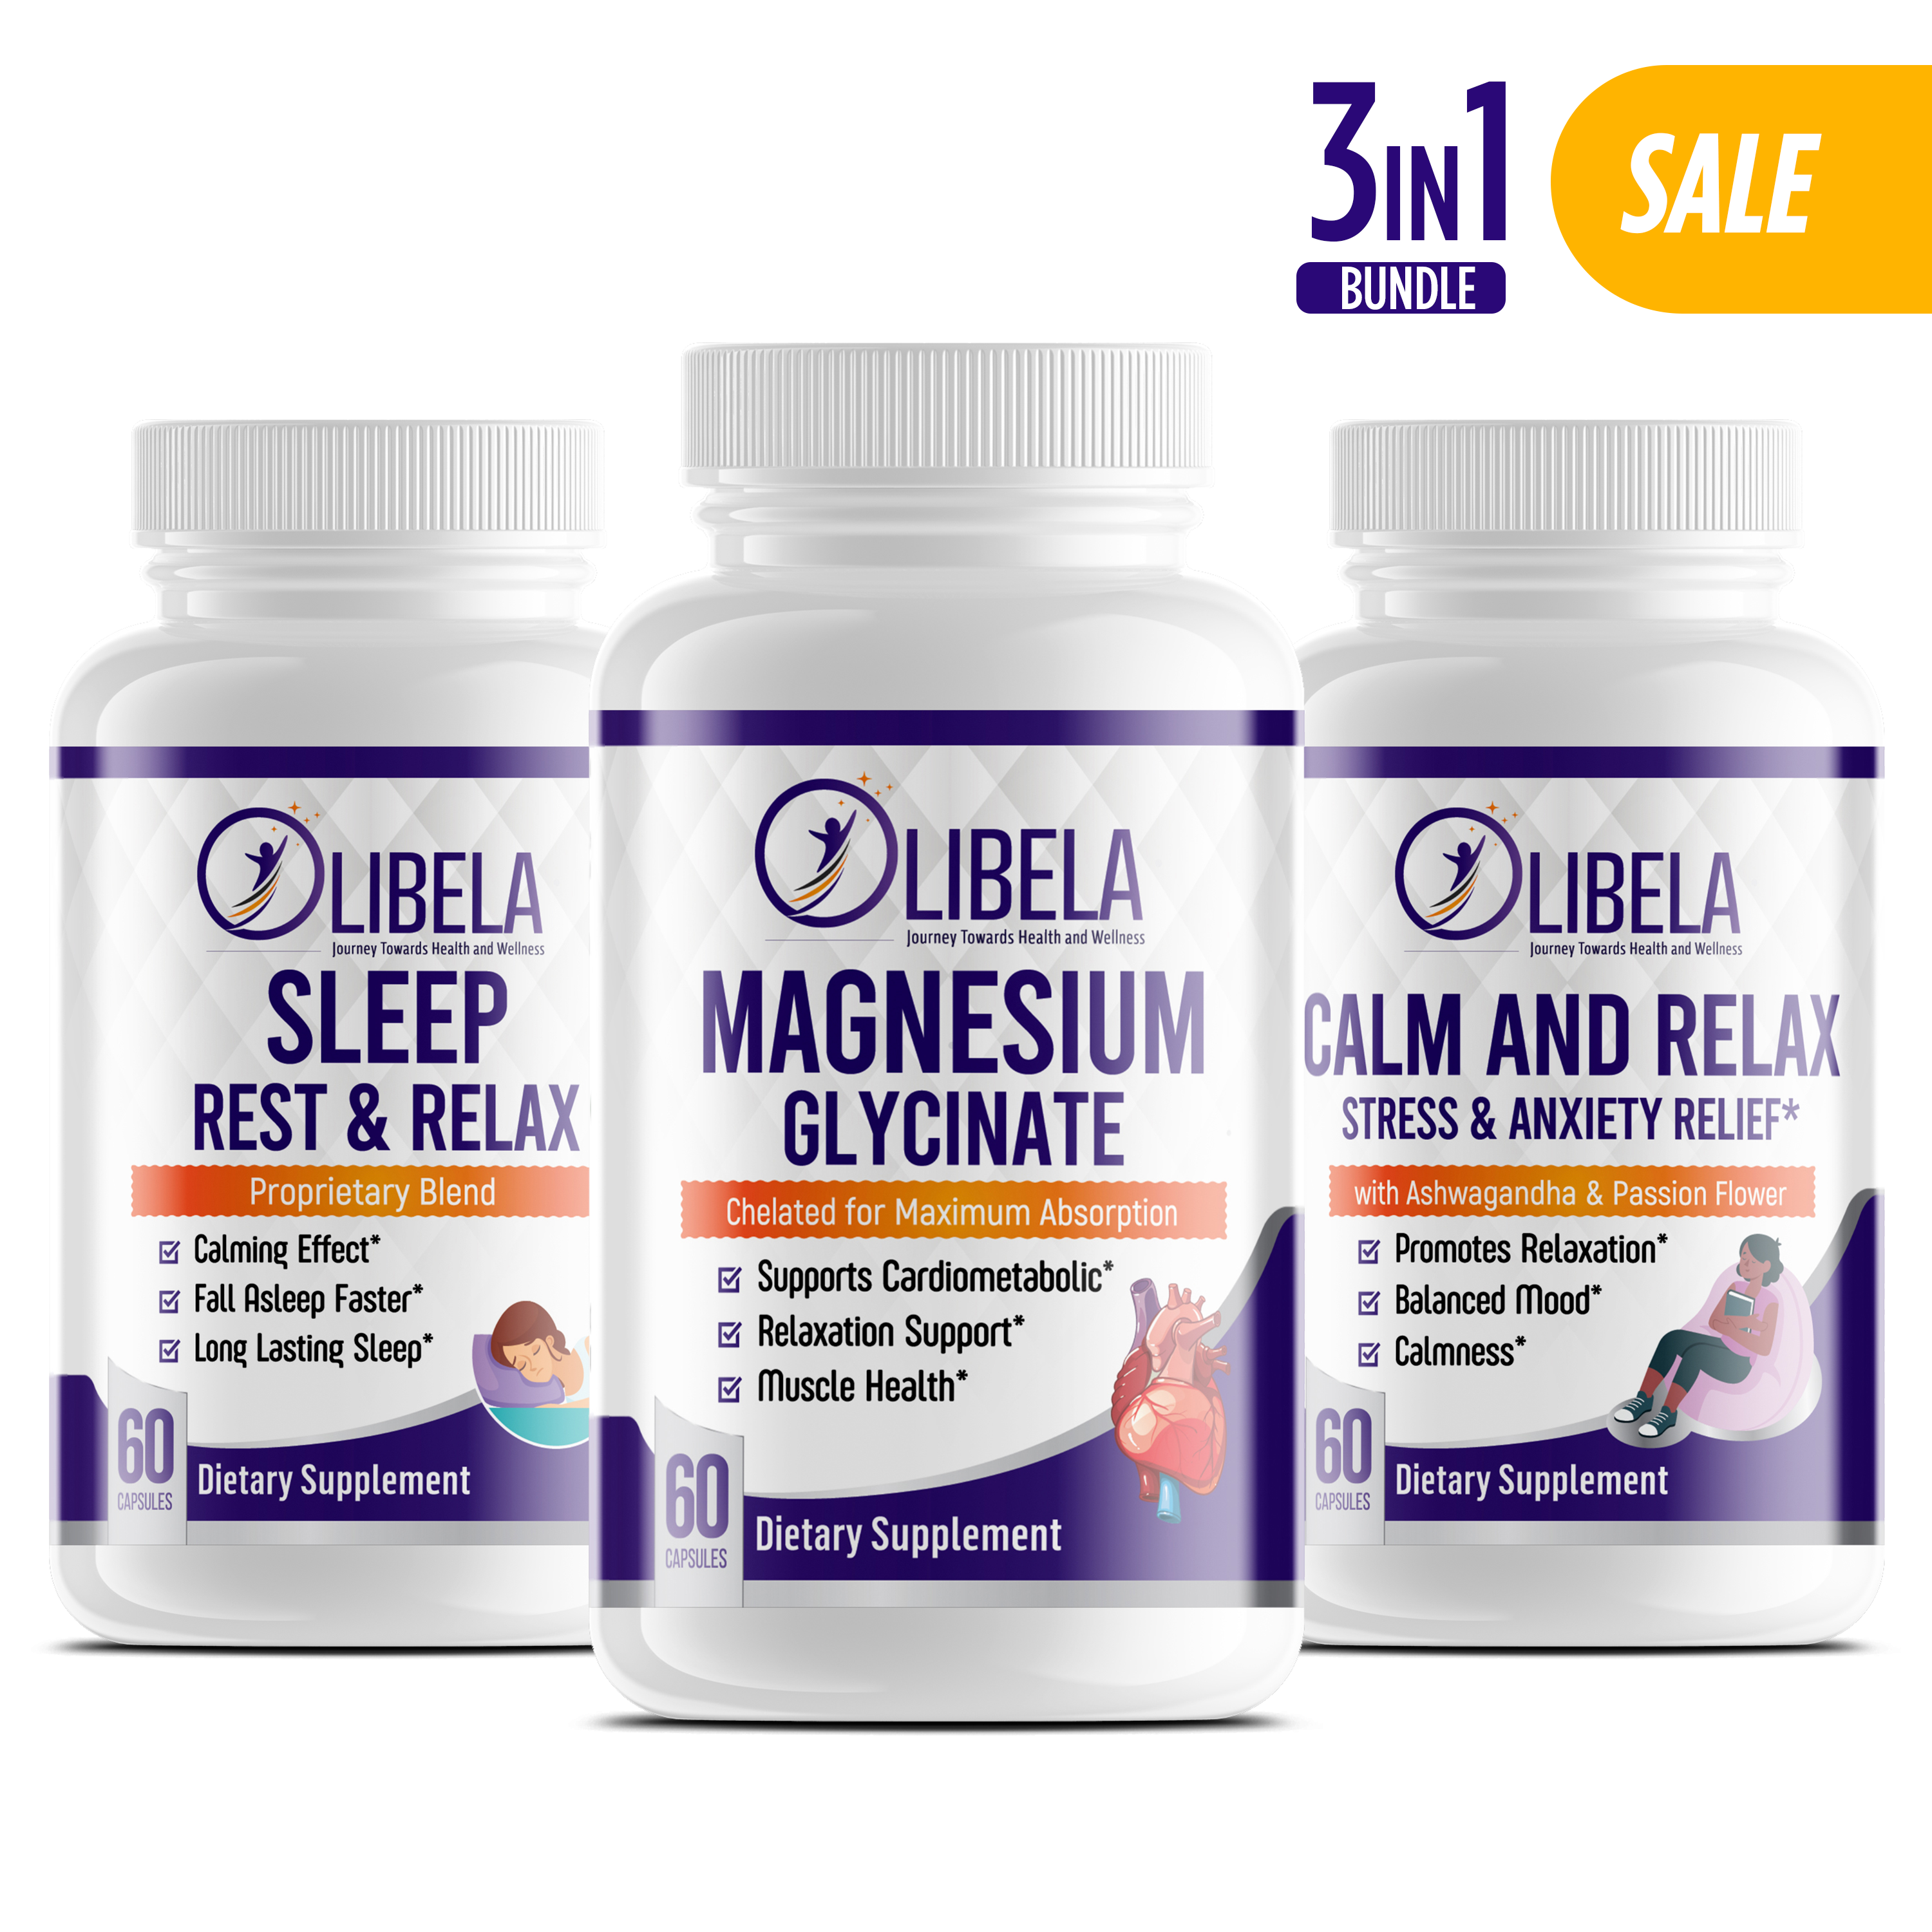 Natural Stress and Anxiety Relief Bundle - Reduces Anxiety, Healthy Sleep, Relaxation, and Improve Mood.